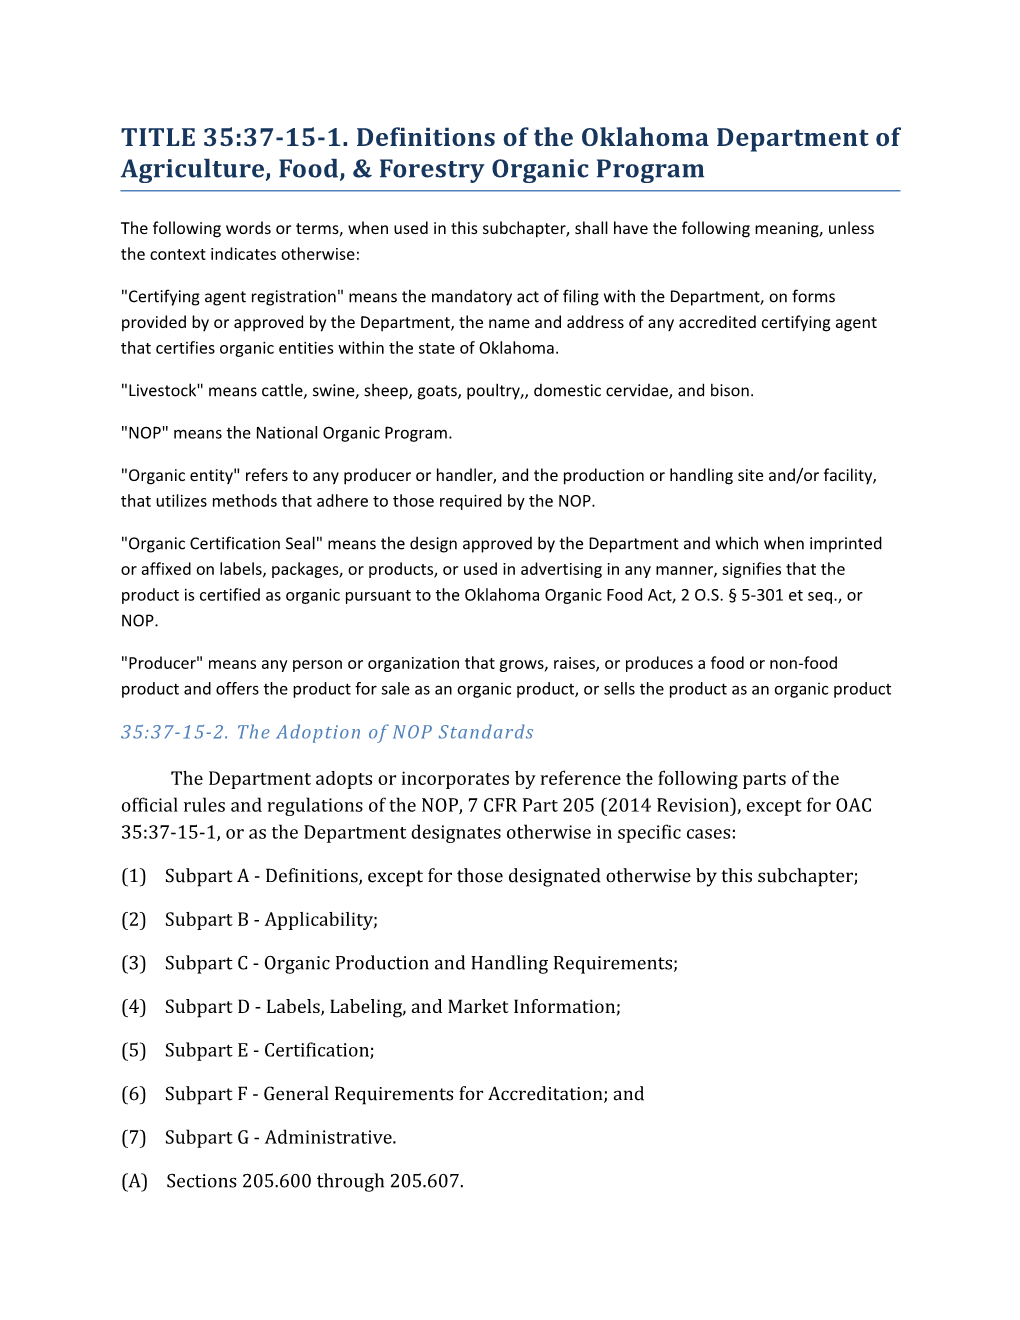 TITLE 35:37-15-1. Definitions of the Oklahoma Department of Agriculture, Food, & Forestry